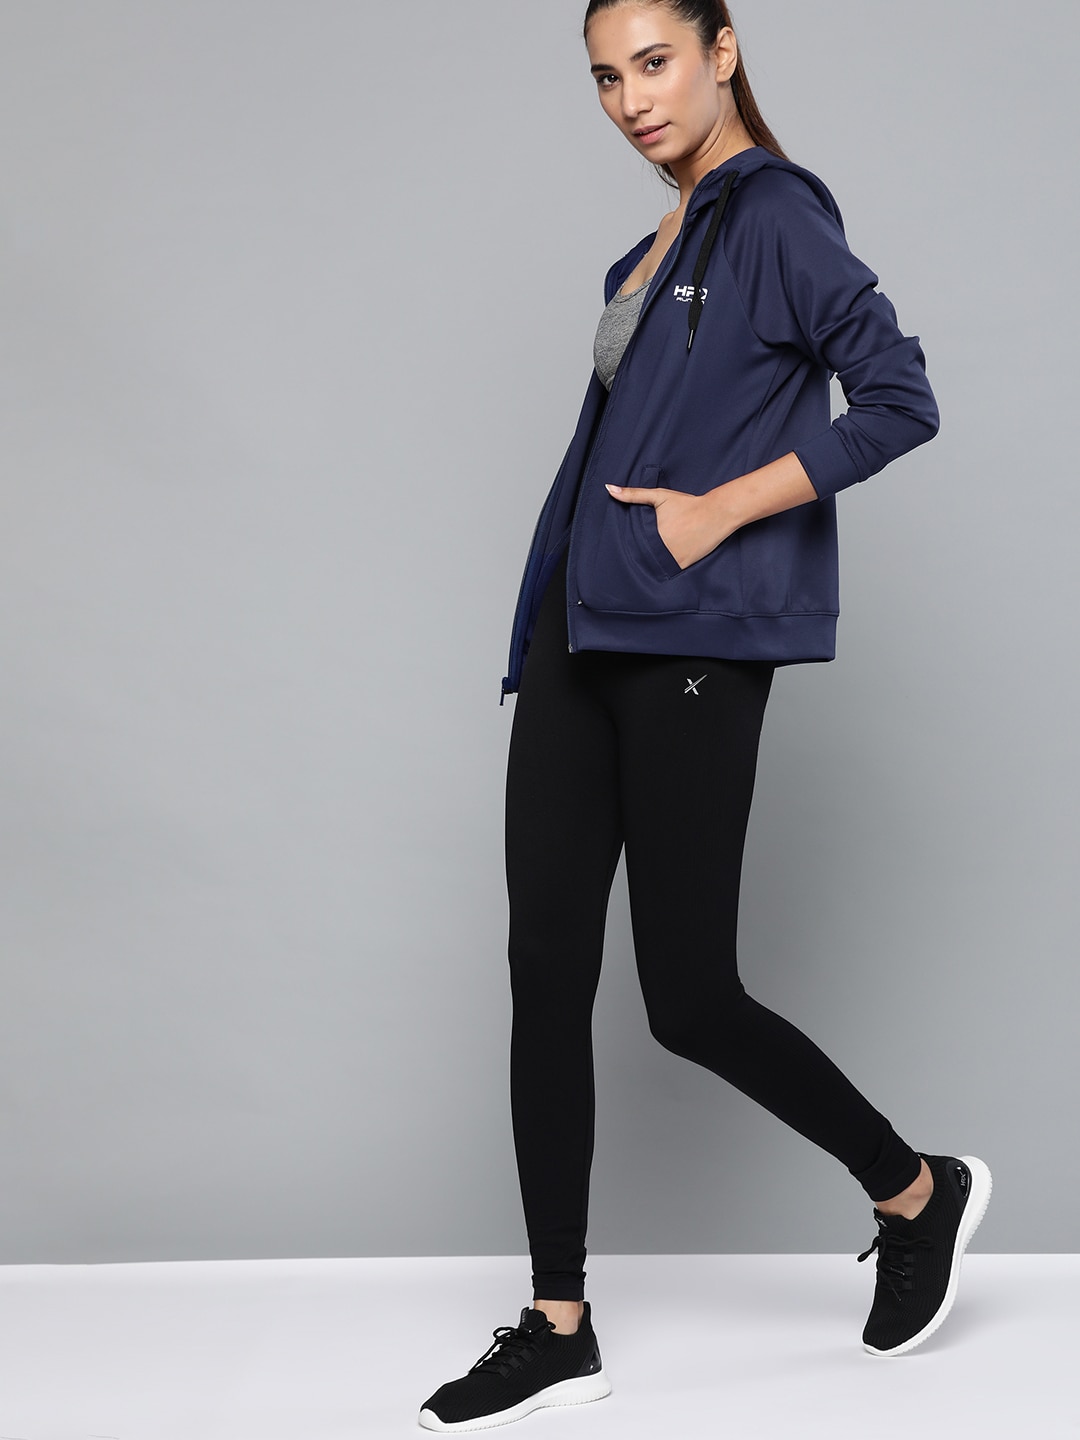 HRX by Hrithik Roshan Women Medieval Blue Solid Rapid-Dry Antimicrobial Running Jacket Price in India